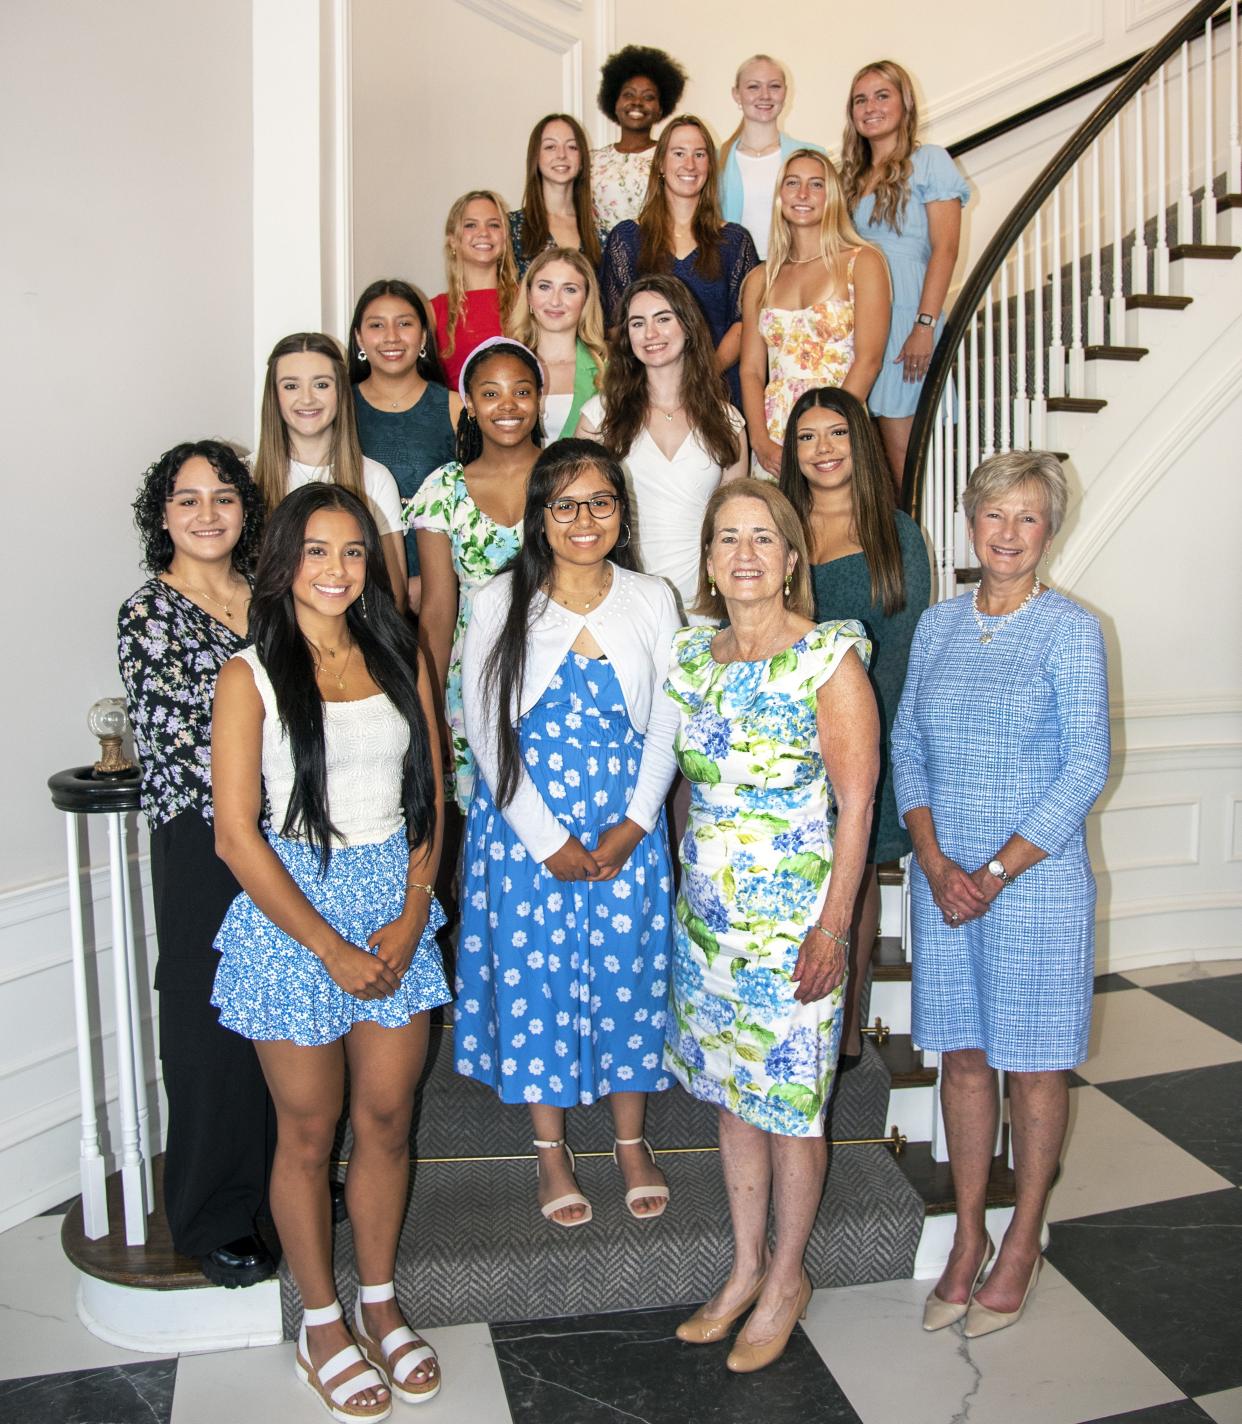 The Oaks Women’s Club recently awarded $5,000 college scholarships to 16 students, surpassing $1 million in scholarships since 2002. “Our 2024 scholarship winners are scholastically superior and have been active in both school and community,” said Terry Gumz, scholarship co-chair. Receiving awards were Emmalee Bunnell, Gisselle Cisneros-Lobo, Bailey Clarke, Addyson Domian, Elsie Hartzell, Aryana Lovely, and Ornella Rokh from Venice High School; Emilee McKelvey from North Port; Lesli Gonzalez-Ramirez, Mykayla Graham, Cephora Moise, Ashley Rosas-Rios, and Aldana Vasquez Pajuelo from Booker; Riley Mayforth and Nazareth Soza Icabalzeta from Sarasota; and Grace Flint from Riverview. Visit theoaksclub.com.